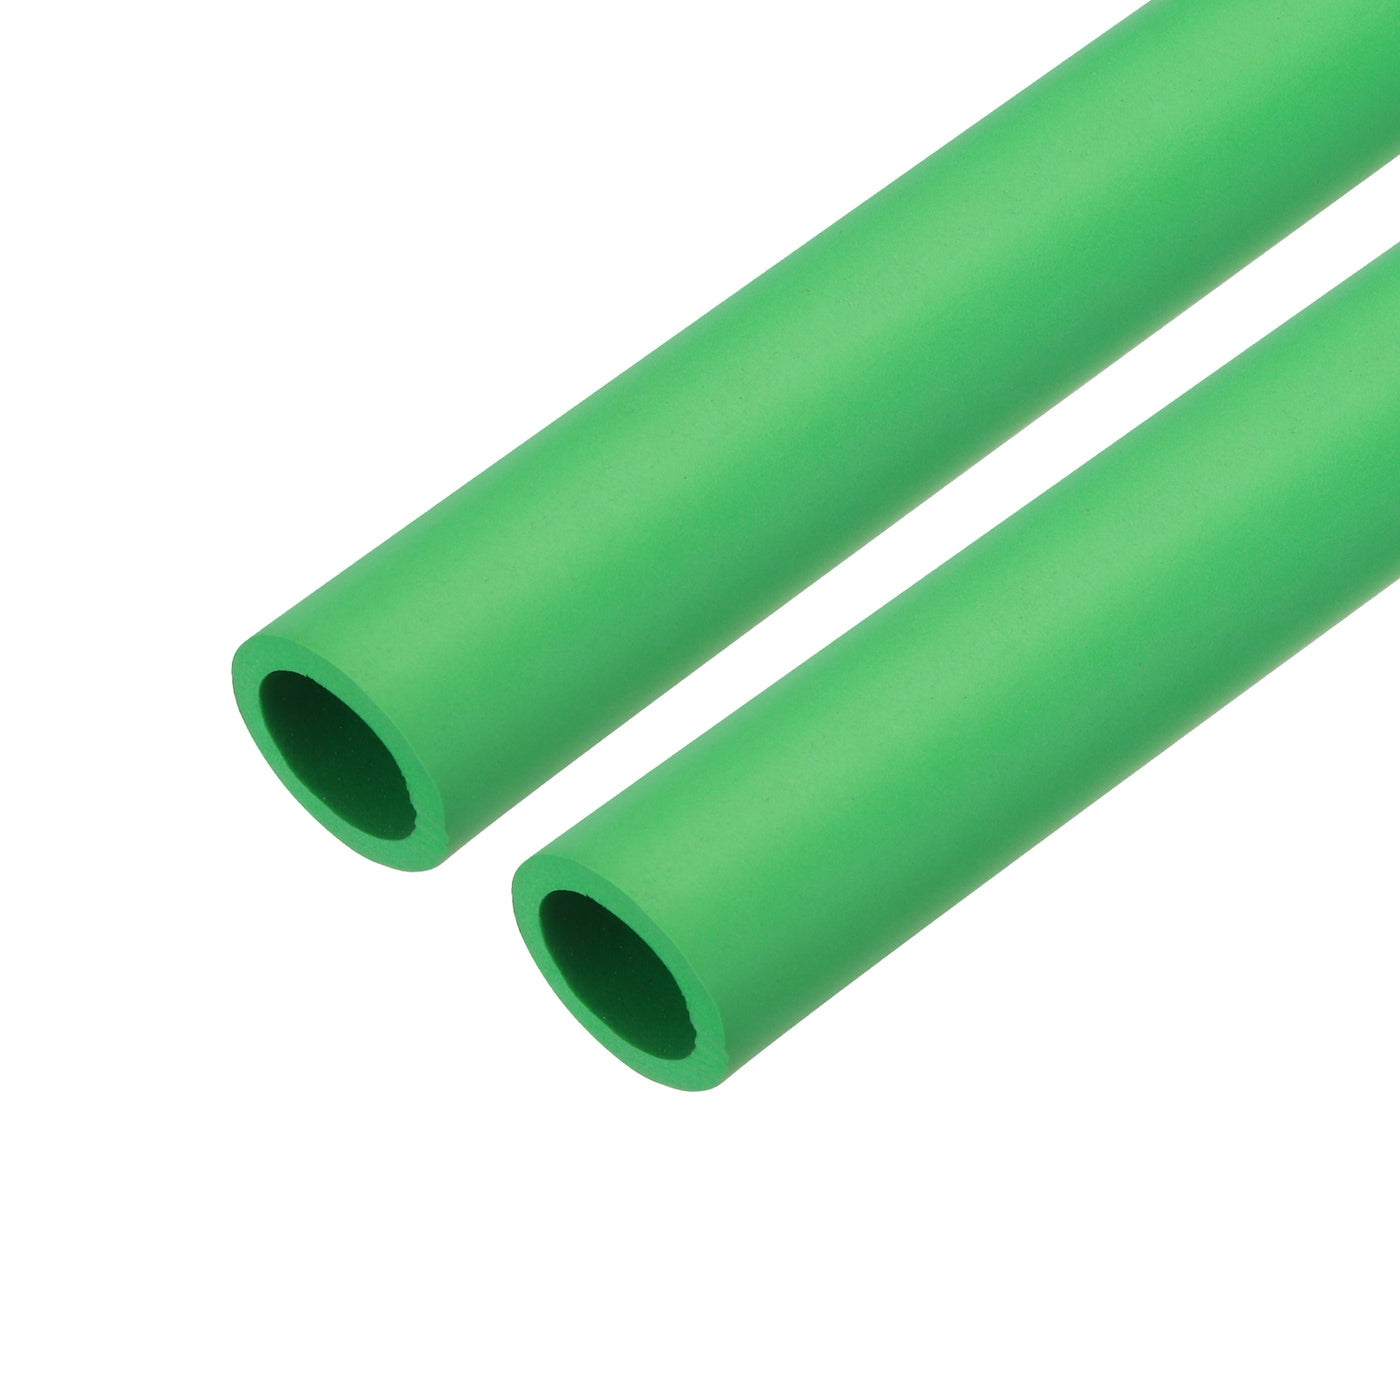 uxcell Uxcell 2pcs 3.3ft Pipe Insulation Tube 1 Inch(25mm) ID 35mm OD Foam Tubing for Handle Grip Support, Green